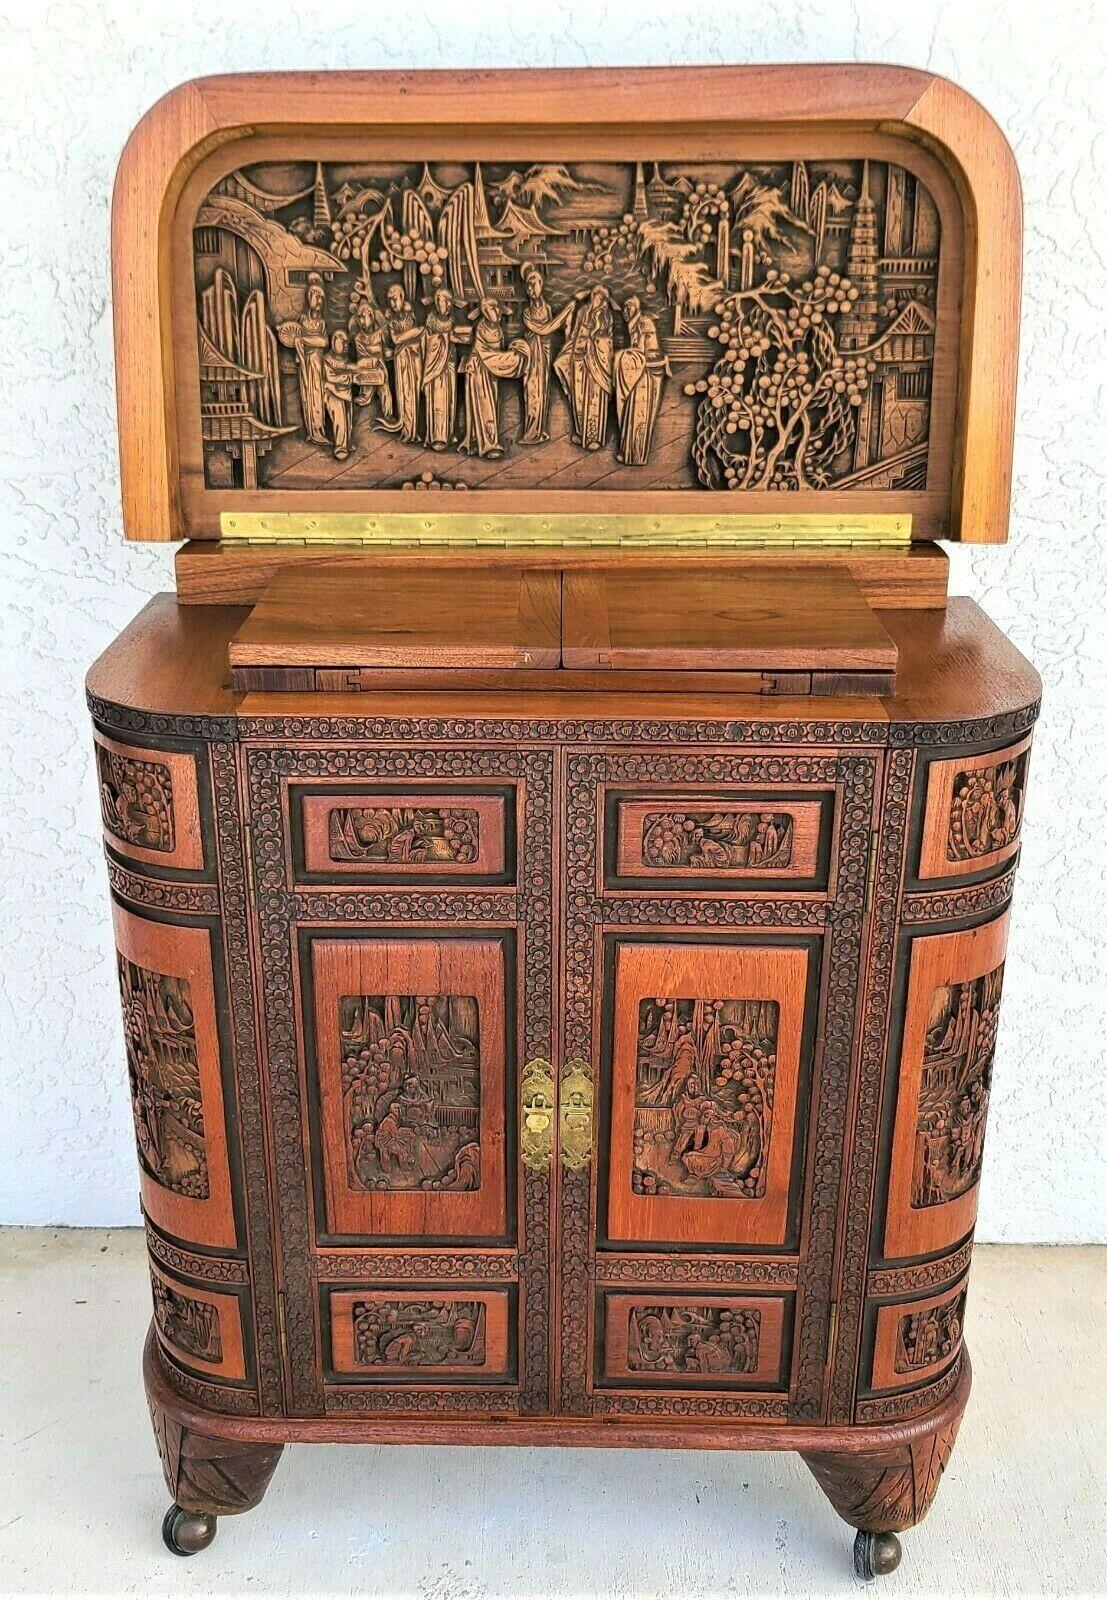 Offering One Of Our Recent Palm Beach Estate Fine Furniture Acquisitions Of A
Mid-Century Asian Oriental Hand-Carved Camphor Wood Dry Bar Cabinet Flip Top
Wonderfully detailed piece with many compartments.

Approximate measurements in inches
35